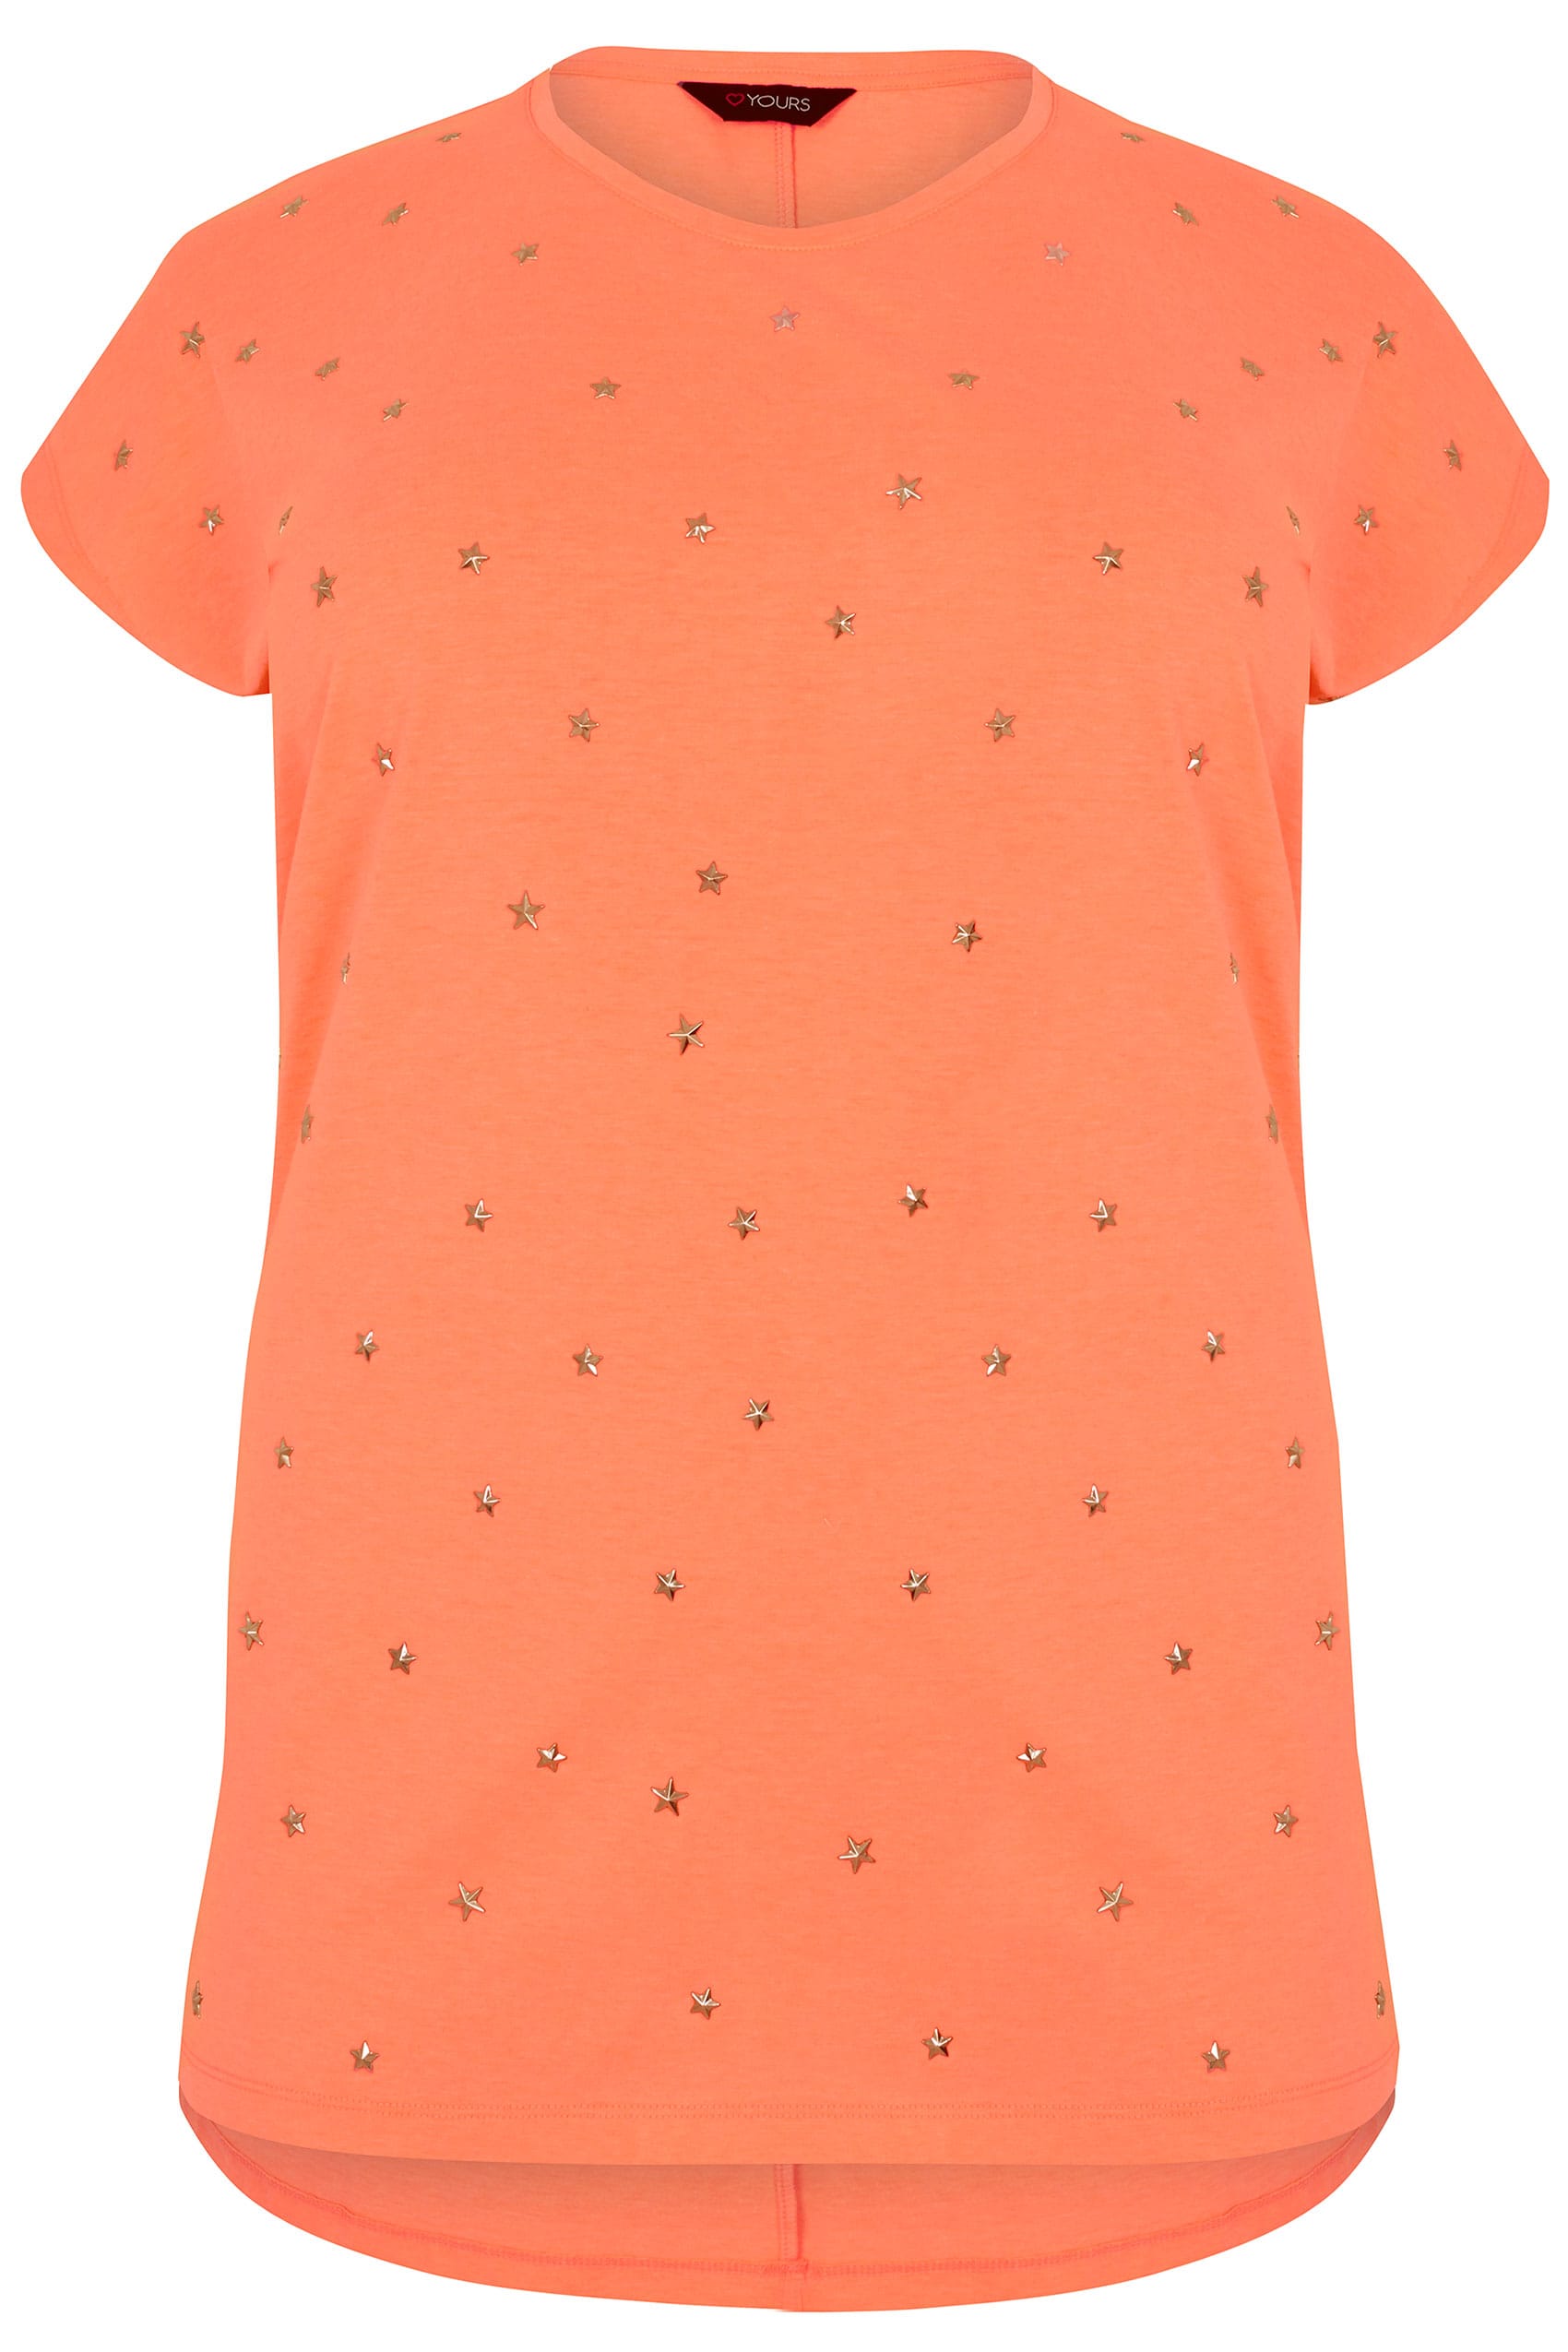 new directions studded neckline curved hem to